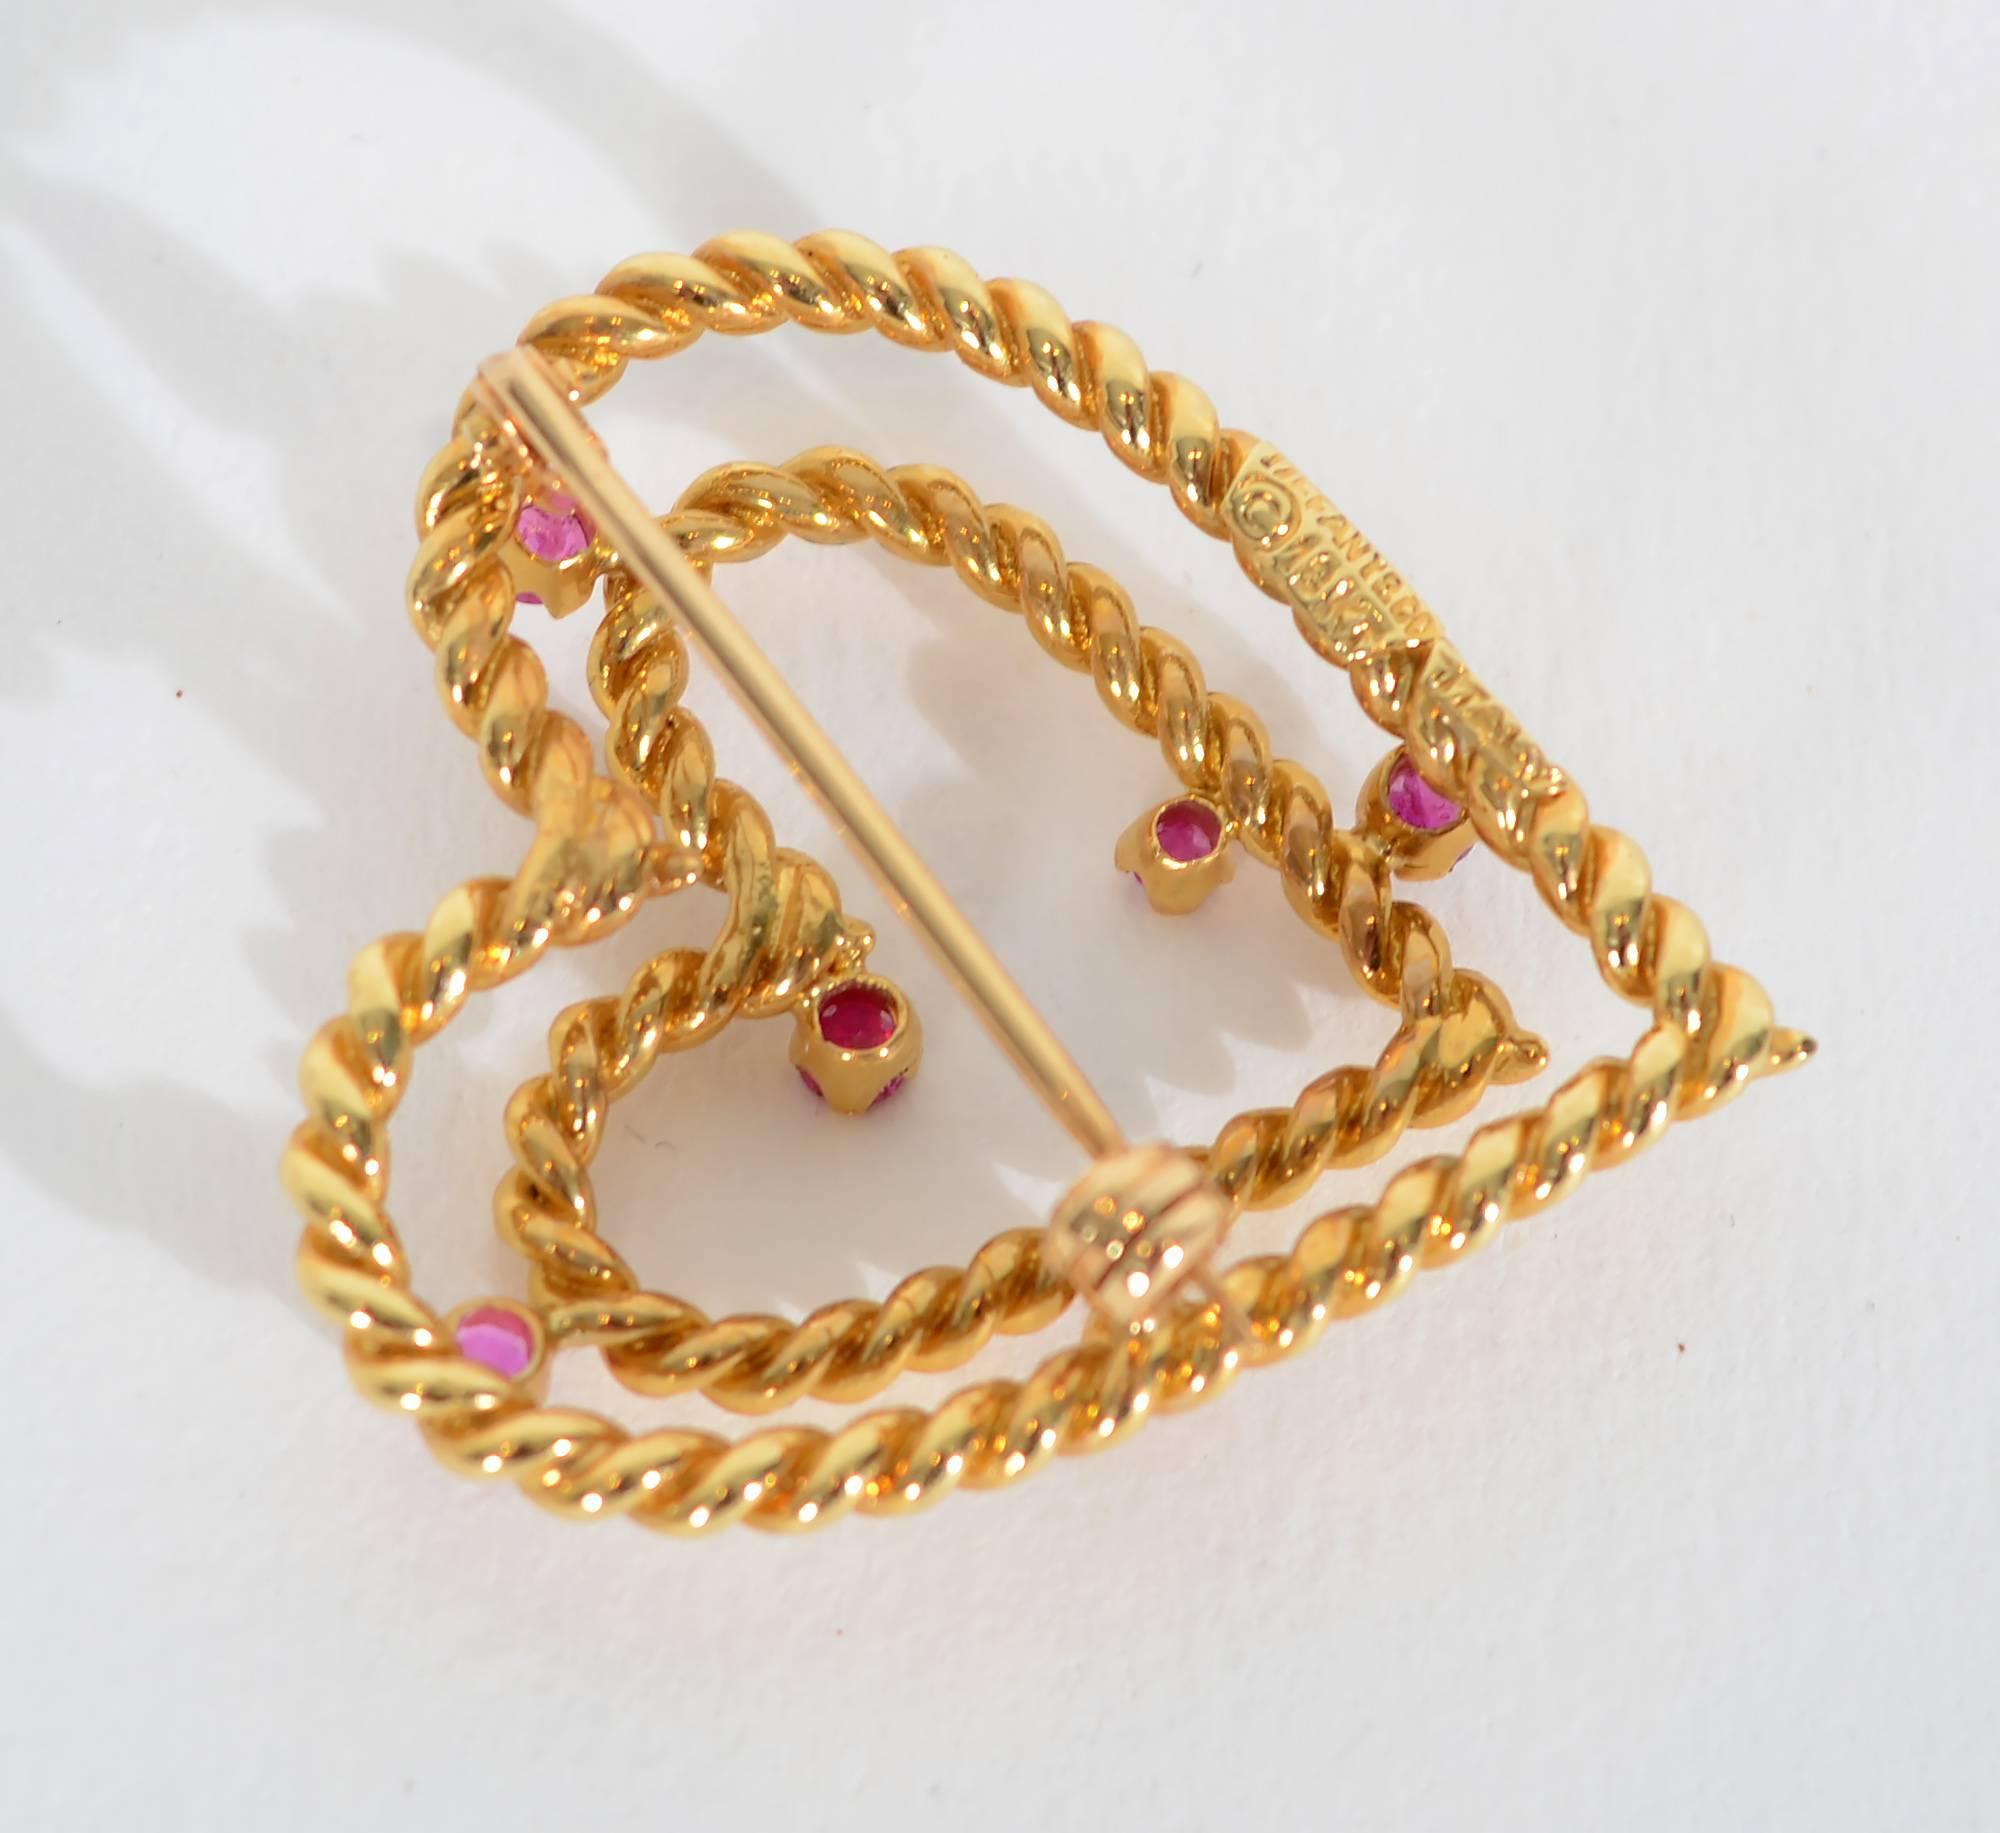 Double open heart brooch by Tiffany and Co. in 18 karat gold. Six rubies are interspersed throughout the twisted gold hearts. The open hearts make a good design as well as a meaningful symbol.